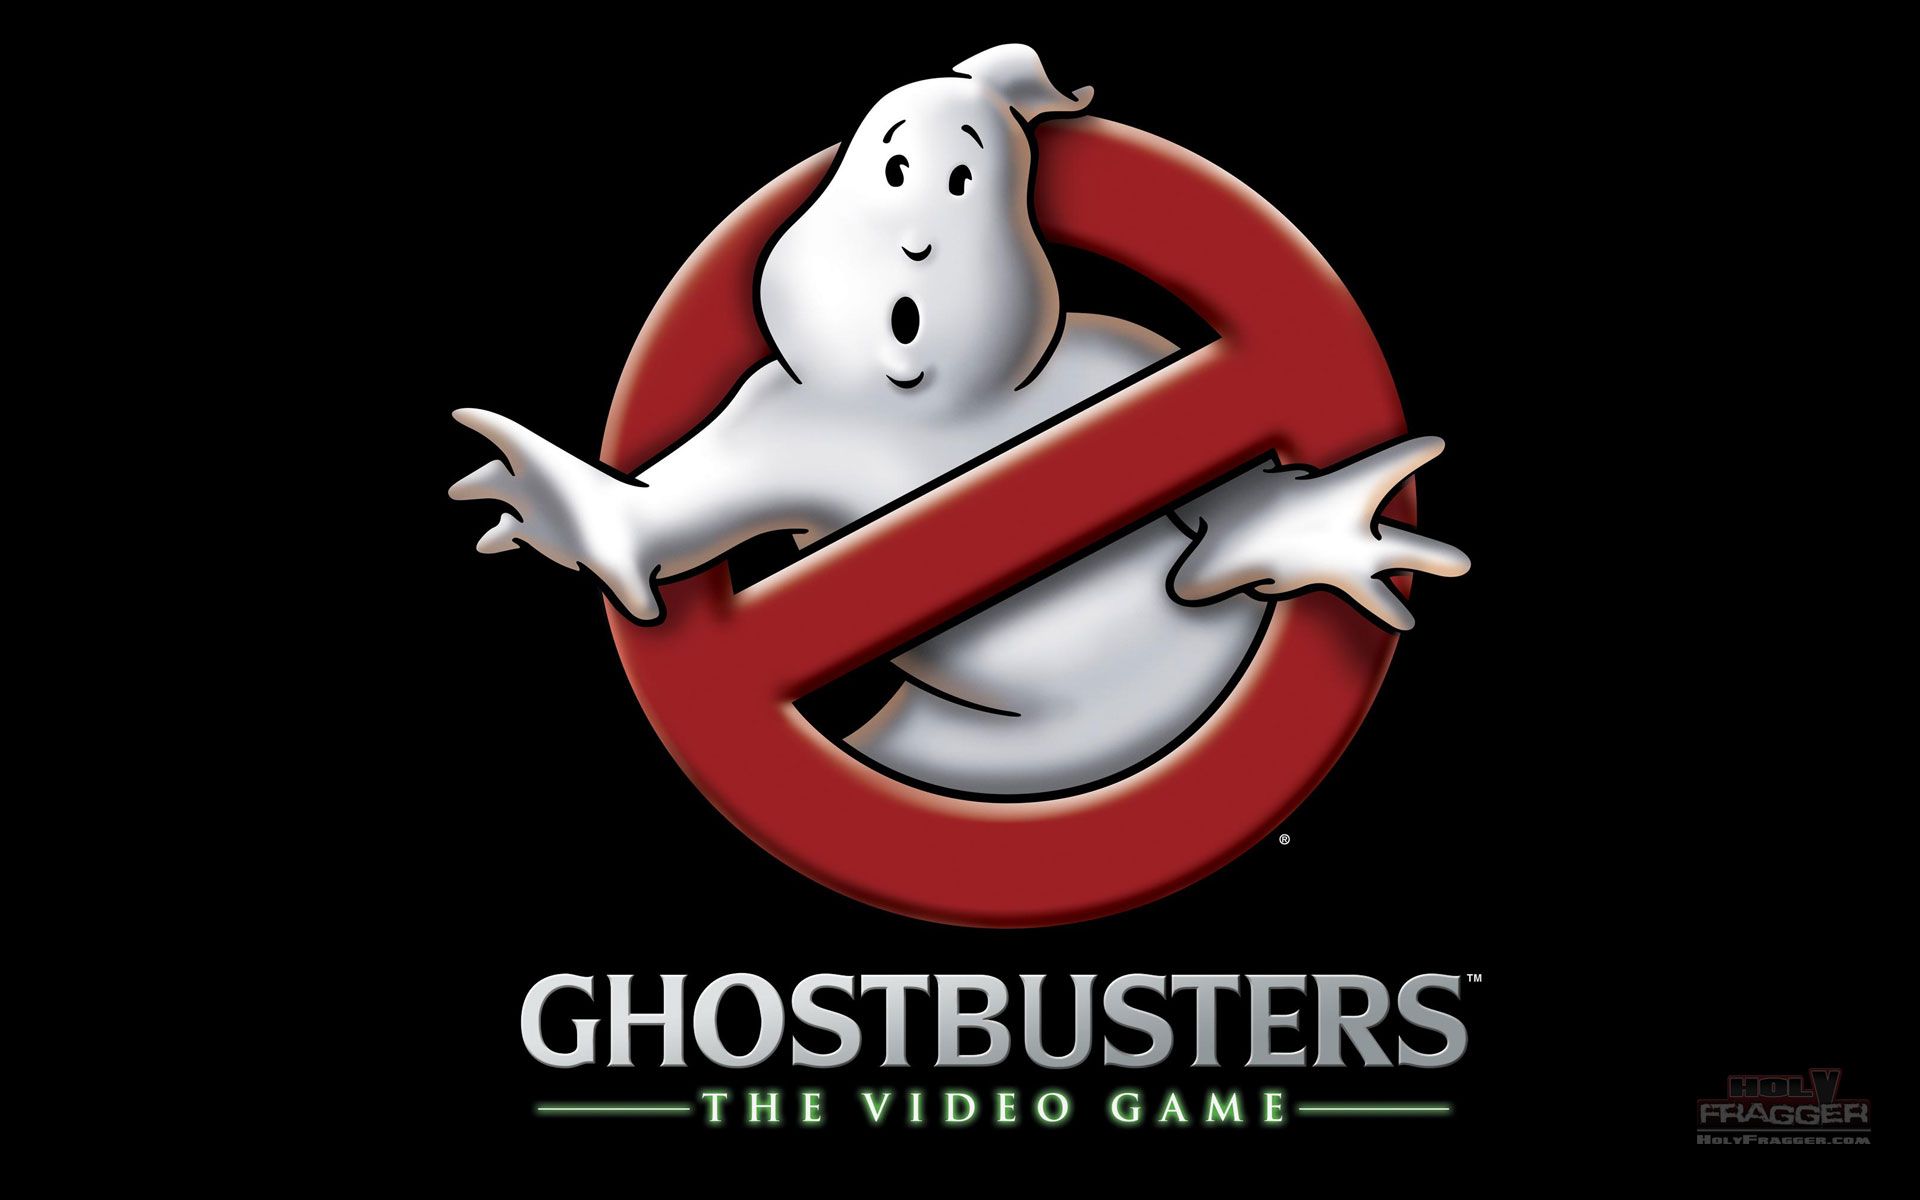 Ghostbusters wallpapers | Ghostbusters stock photos